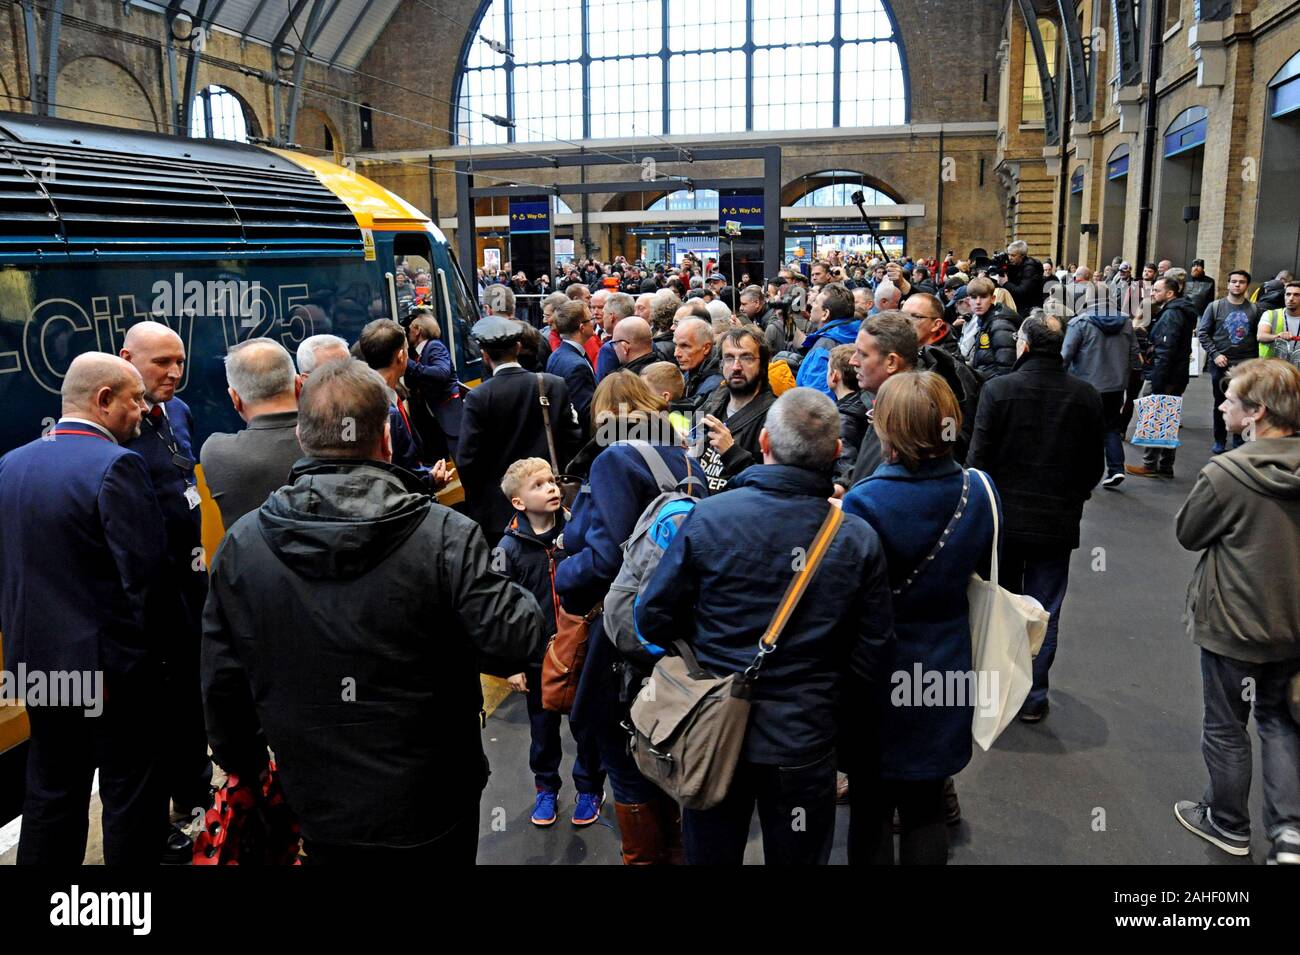 Rail enthusiasts photograph a restored InterCity 125 train at King's Cross Station concluding a 4 day tour as the last HST on the East Coast Main Line Stock Photo